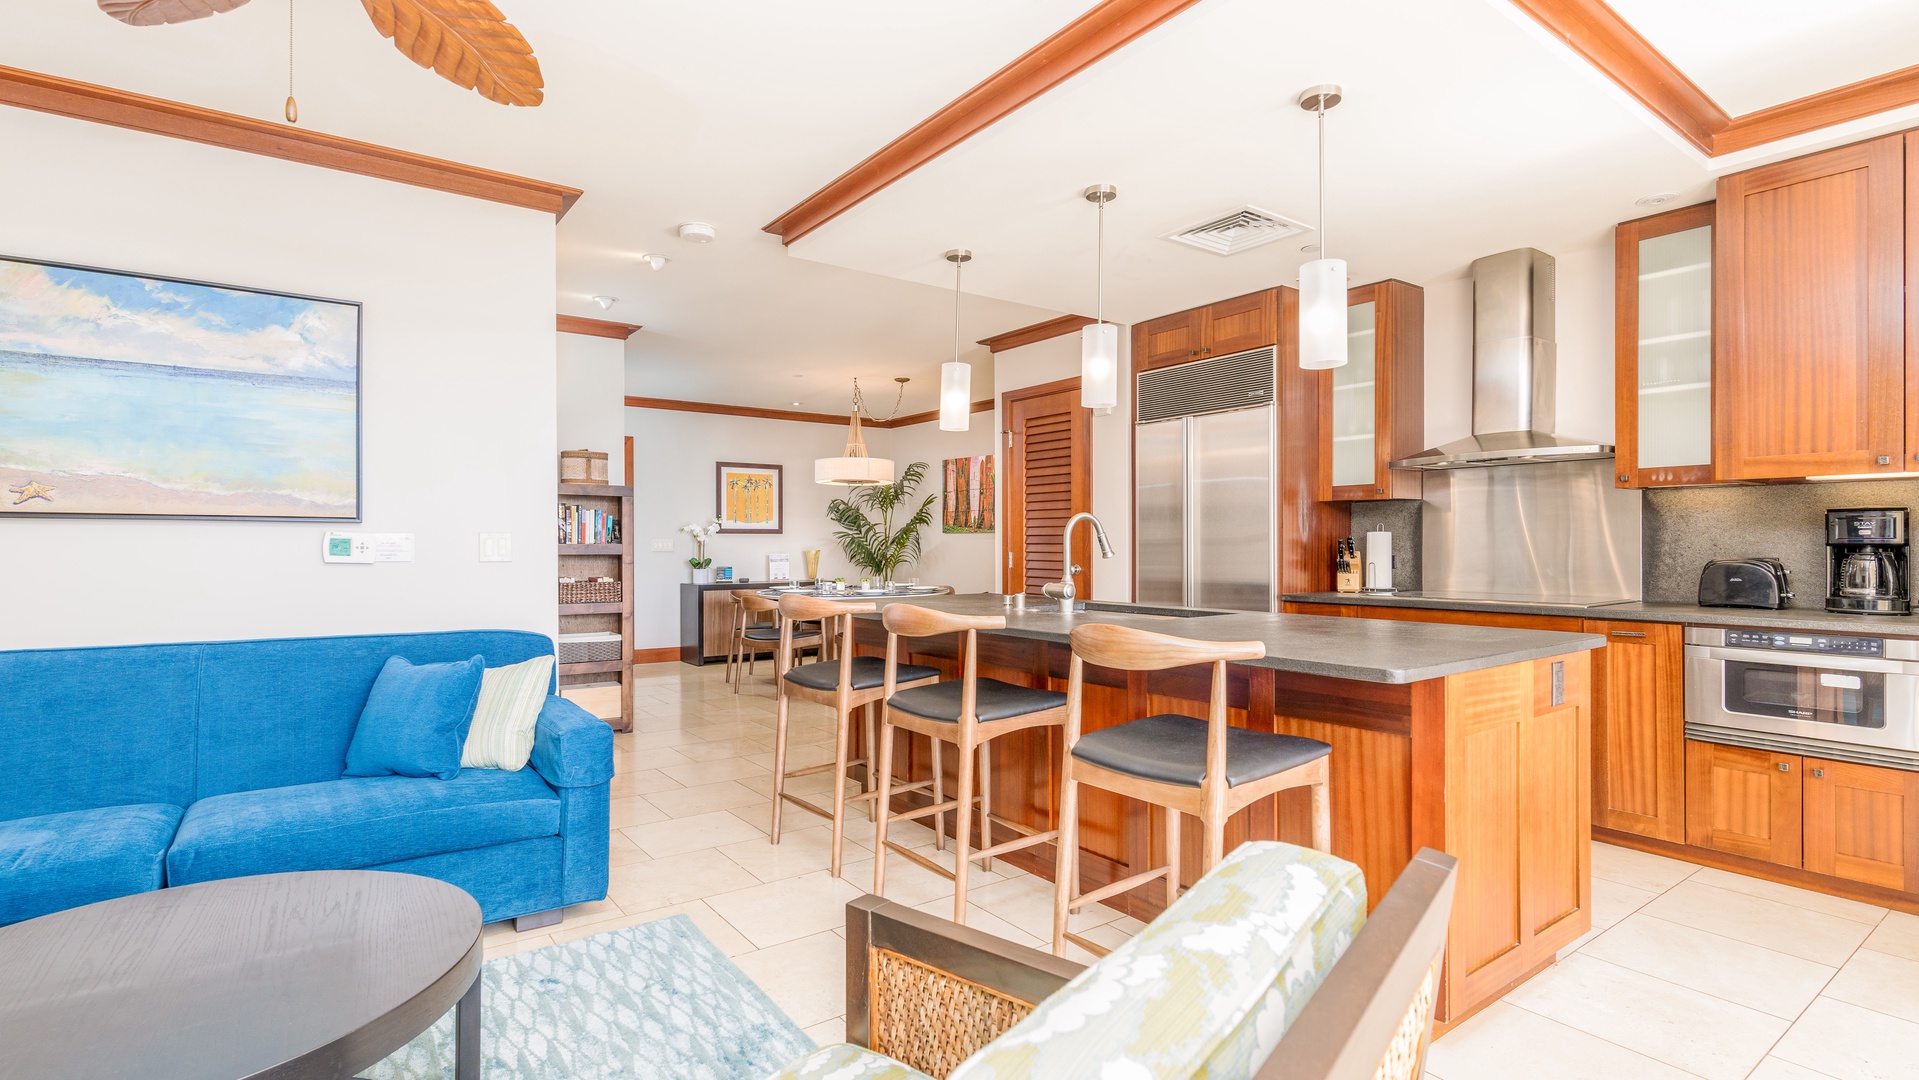 Kapolei Vacation Rentals, Ko Olina Beach Villas O305 - The open floor plan for the kitchen, living and dining areas.